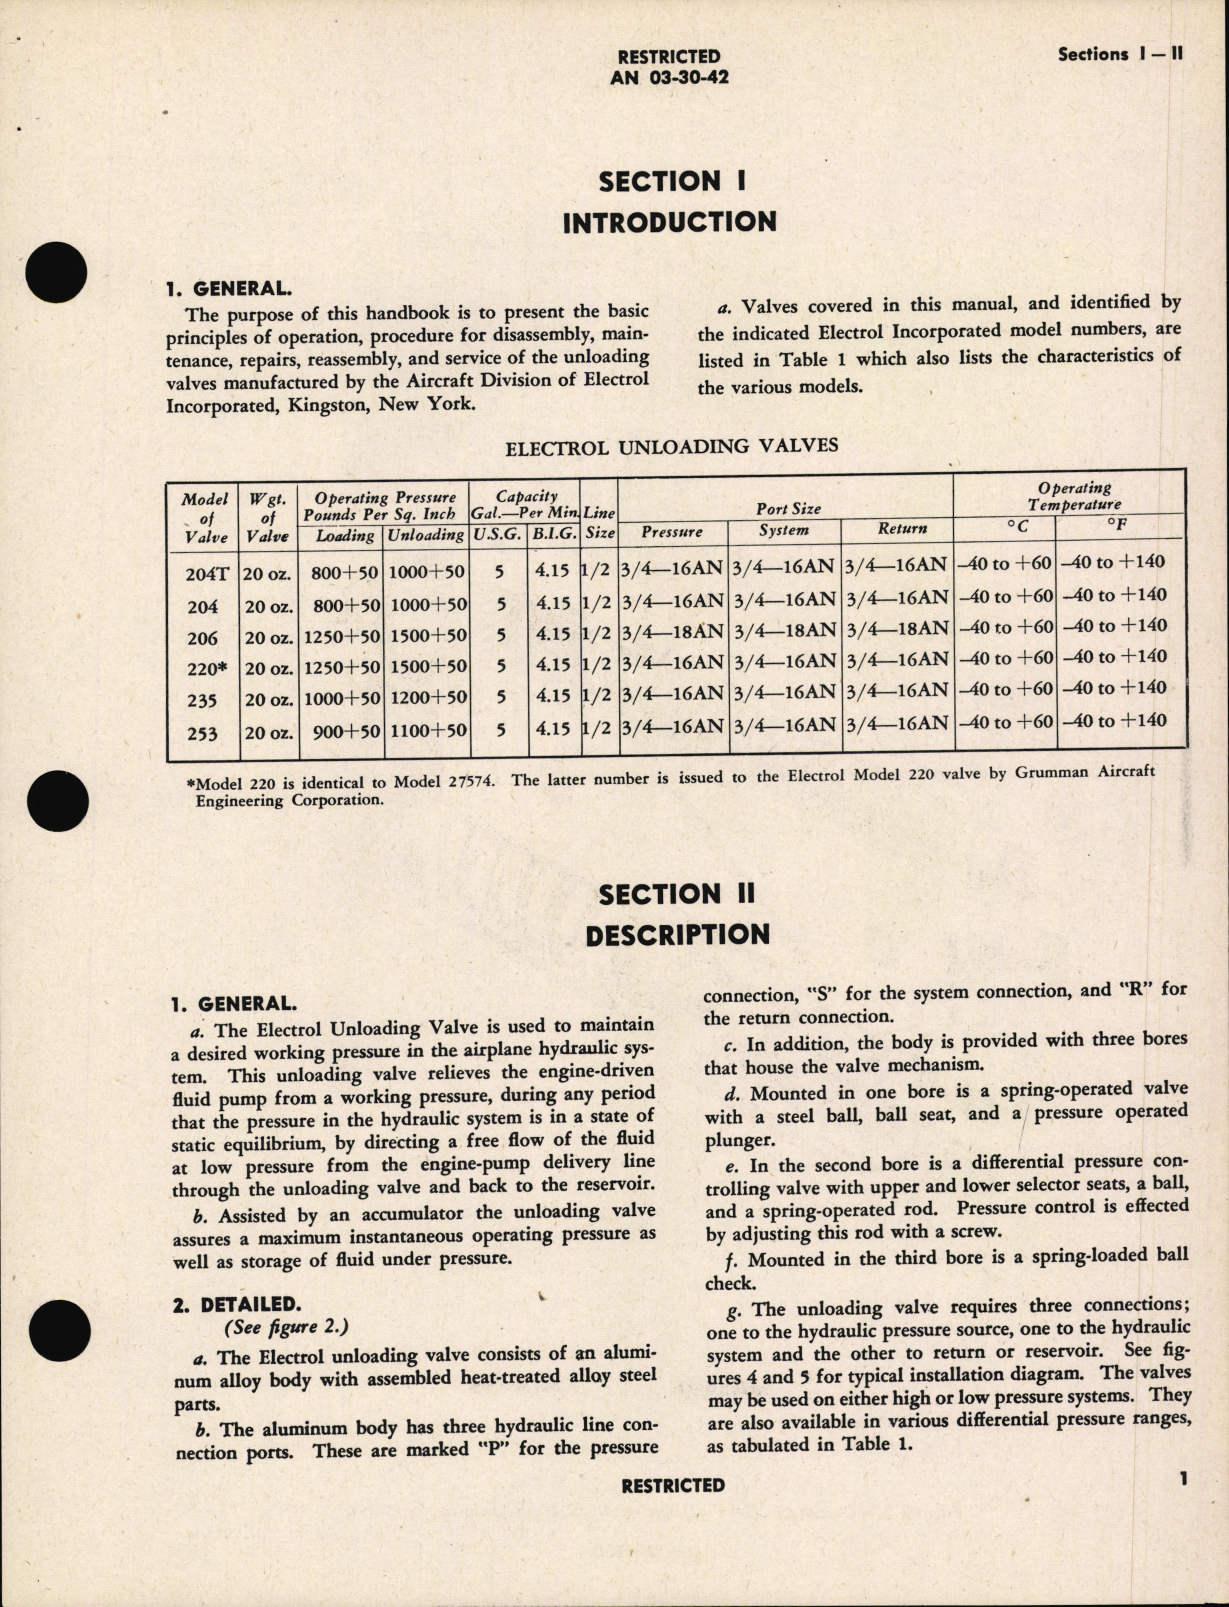 Sample page 5 from AirCorps Library document: Handbook of Instructions with Parts Catalog for Unloading Valves